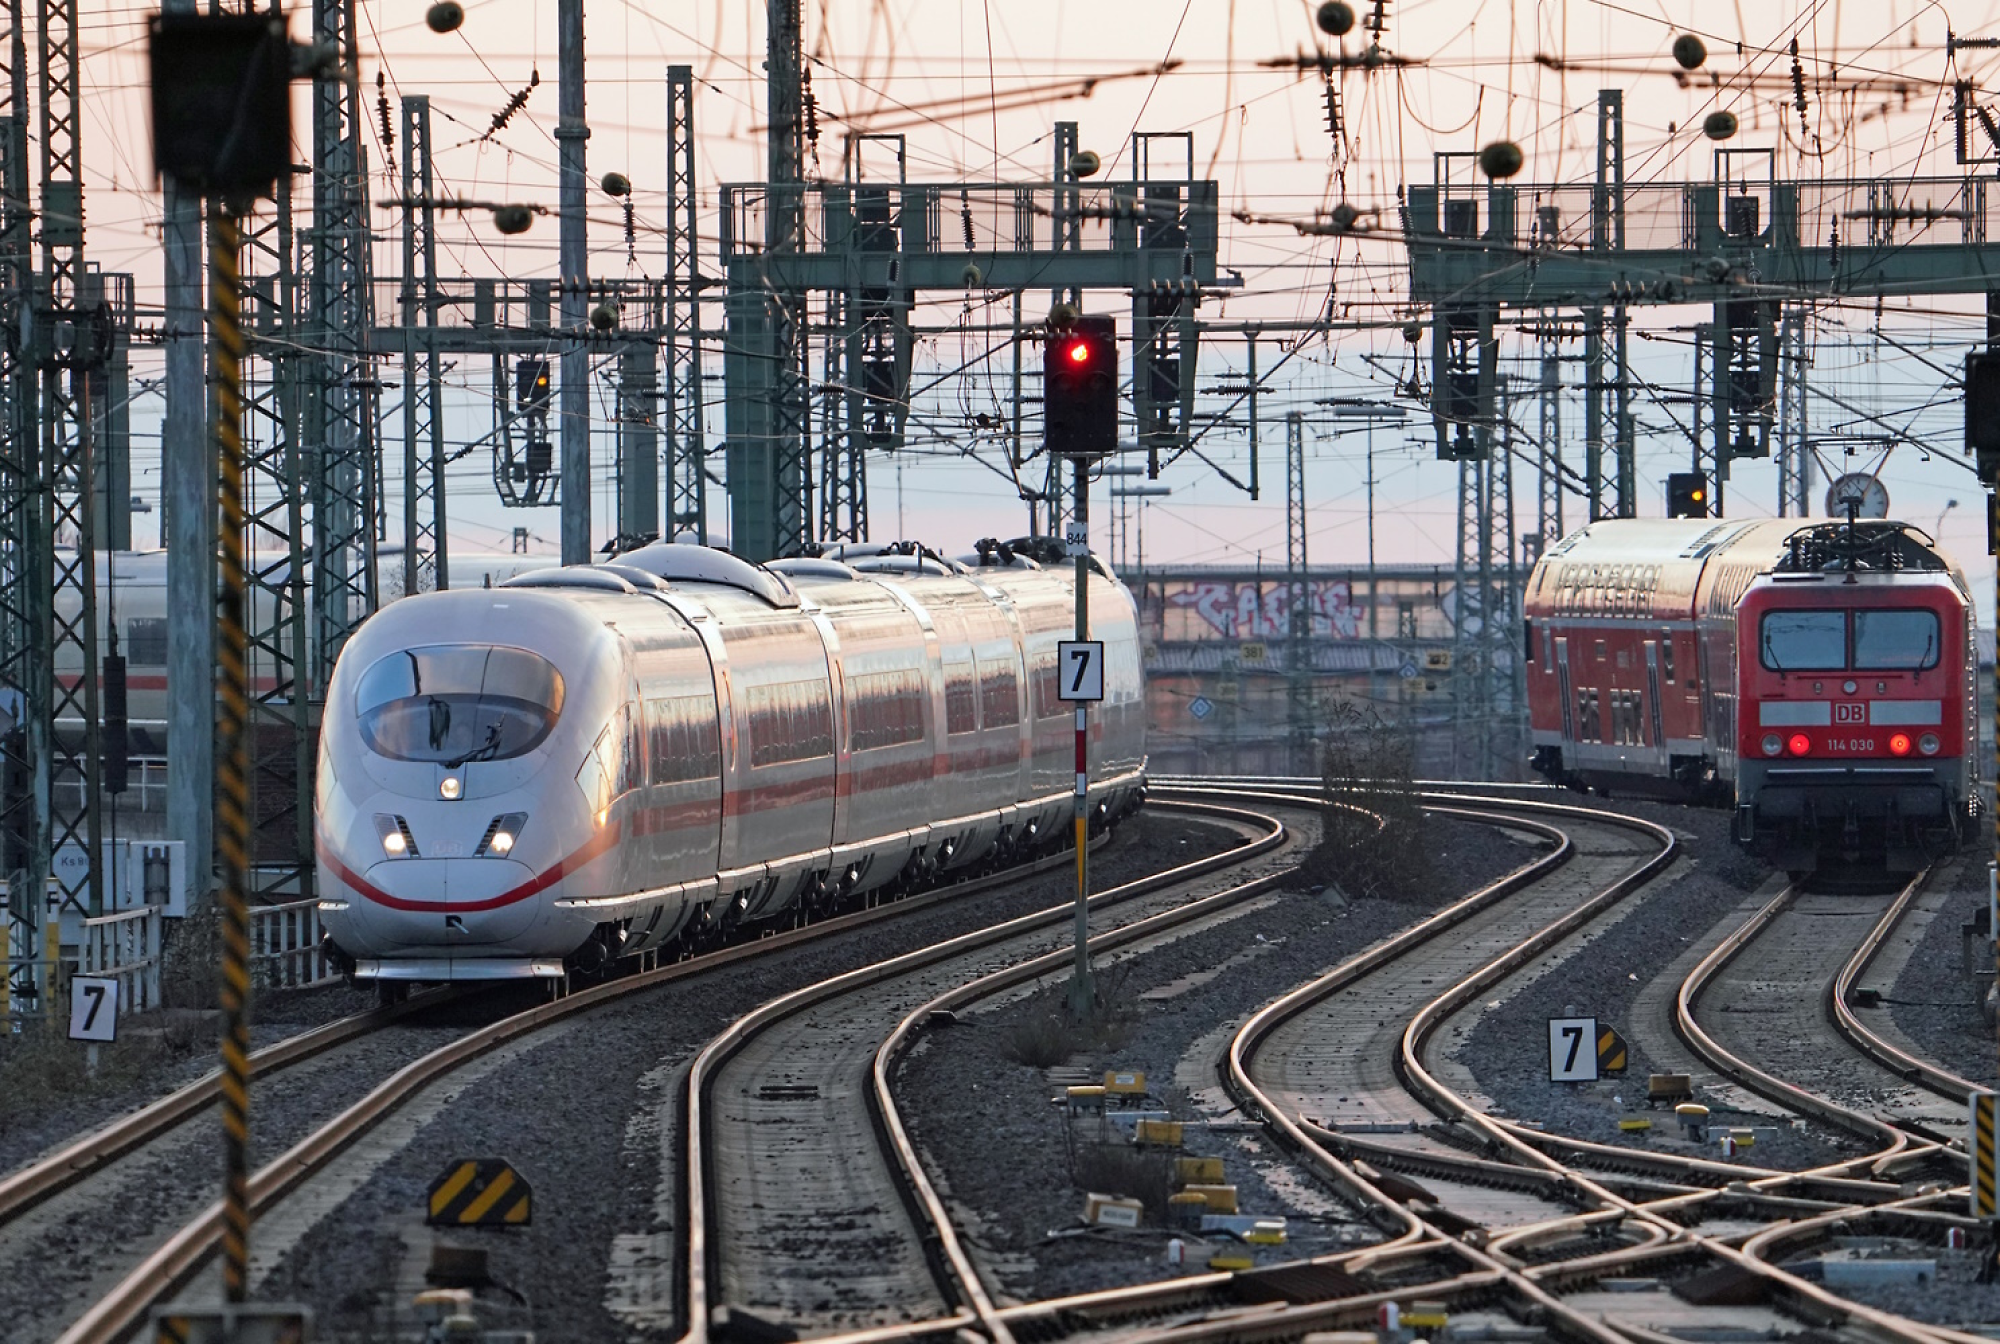 A modern high-speed train arriving at a station with multiple railway tracks and overhead wires at dusk.